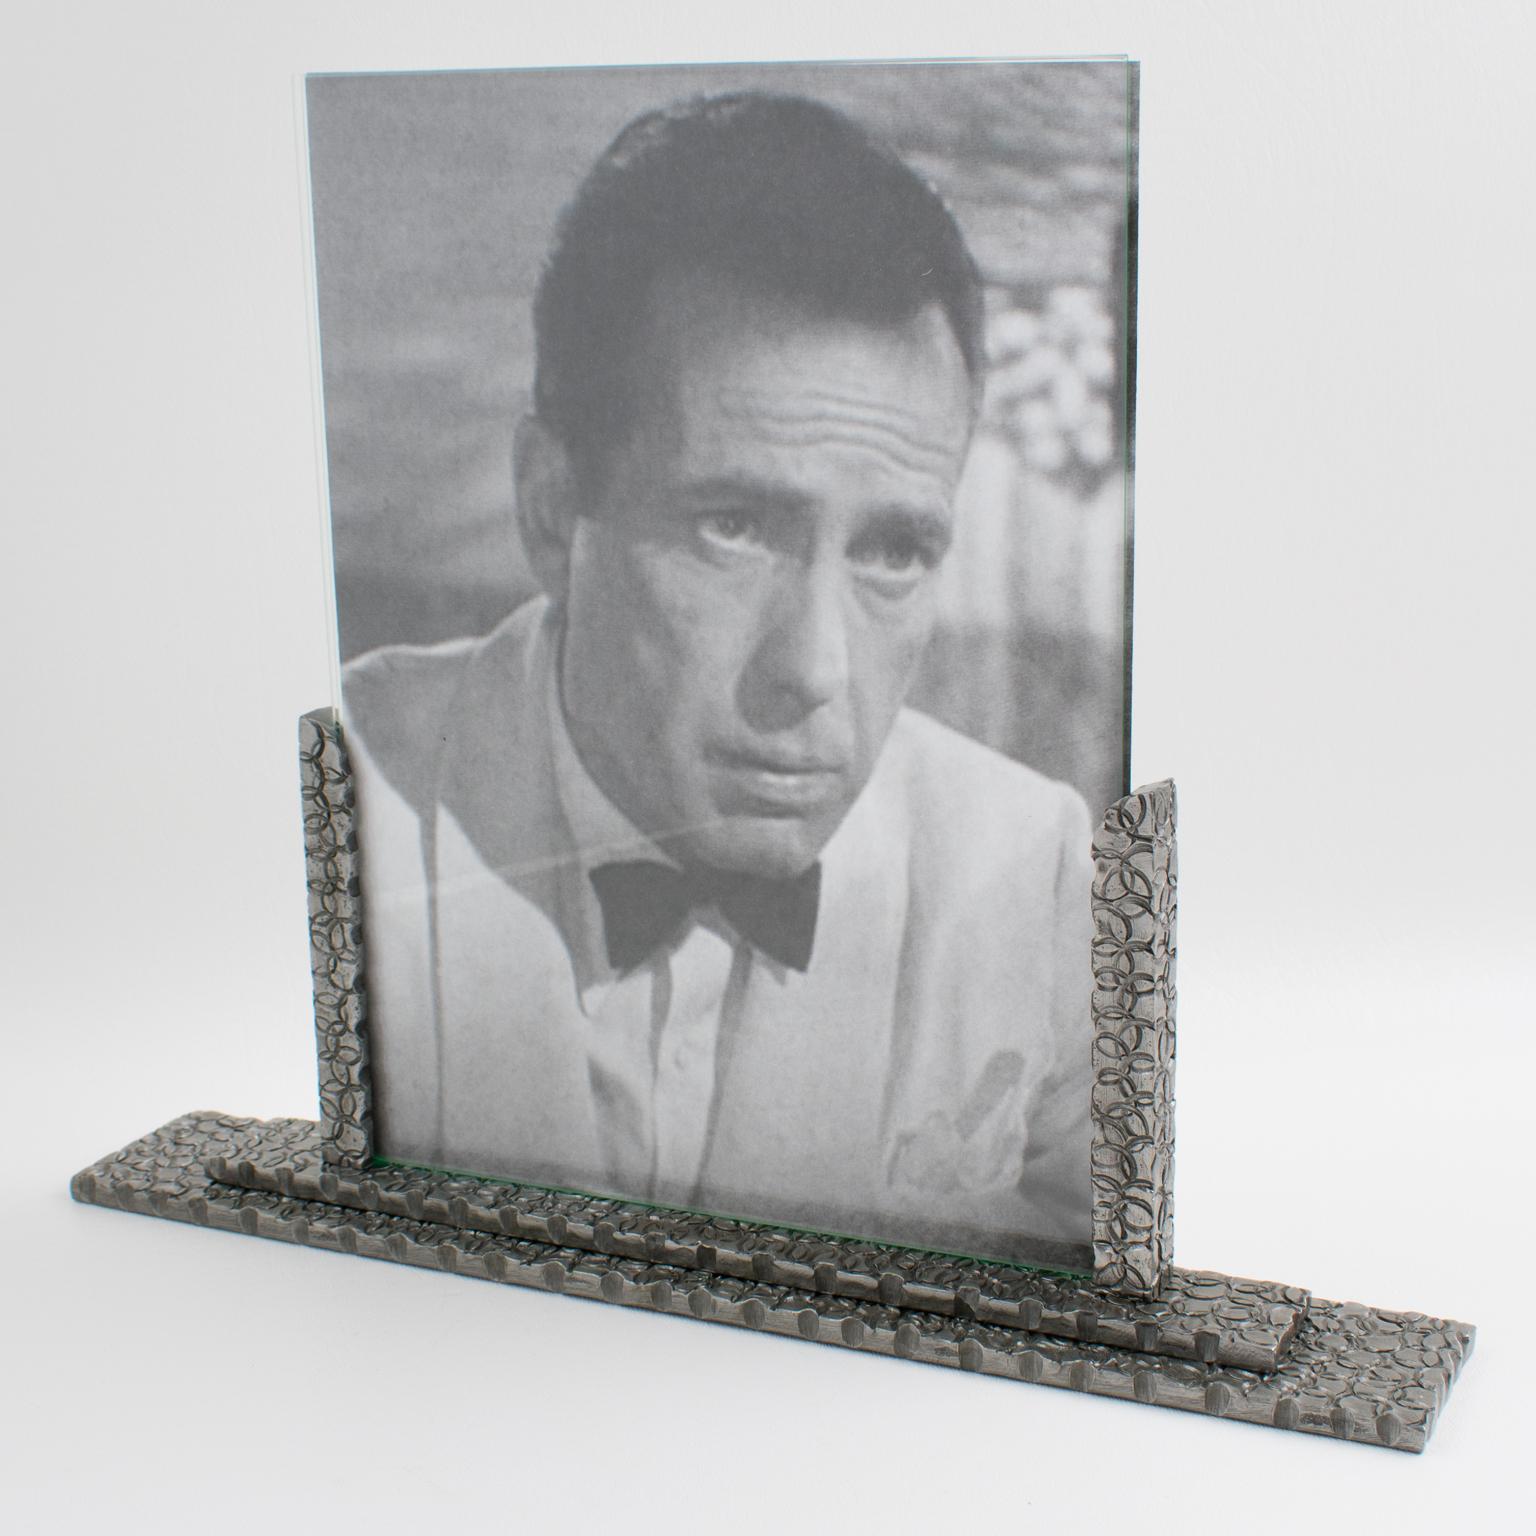 Elegantly ornate French 1930s modernist picture photo frame. Wrought iron plinth and holders with a detailed carved textured pattern. The frame is complete with its two glass sheets to protect the photography. No visible maker's